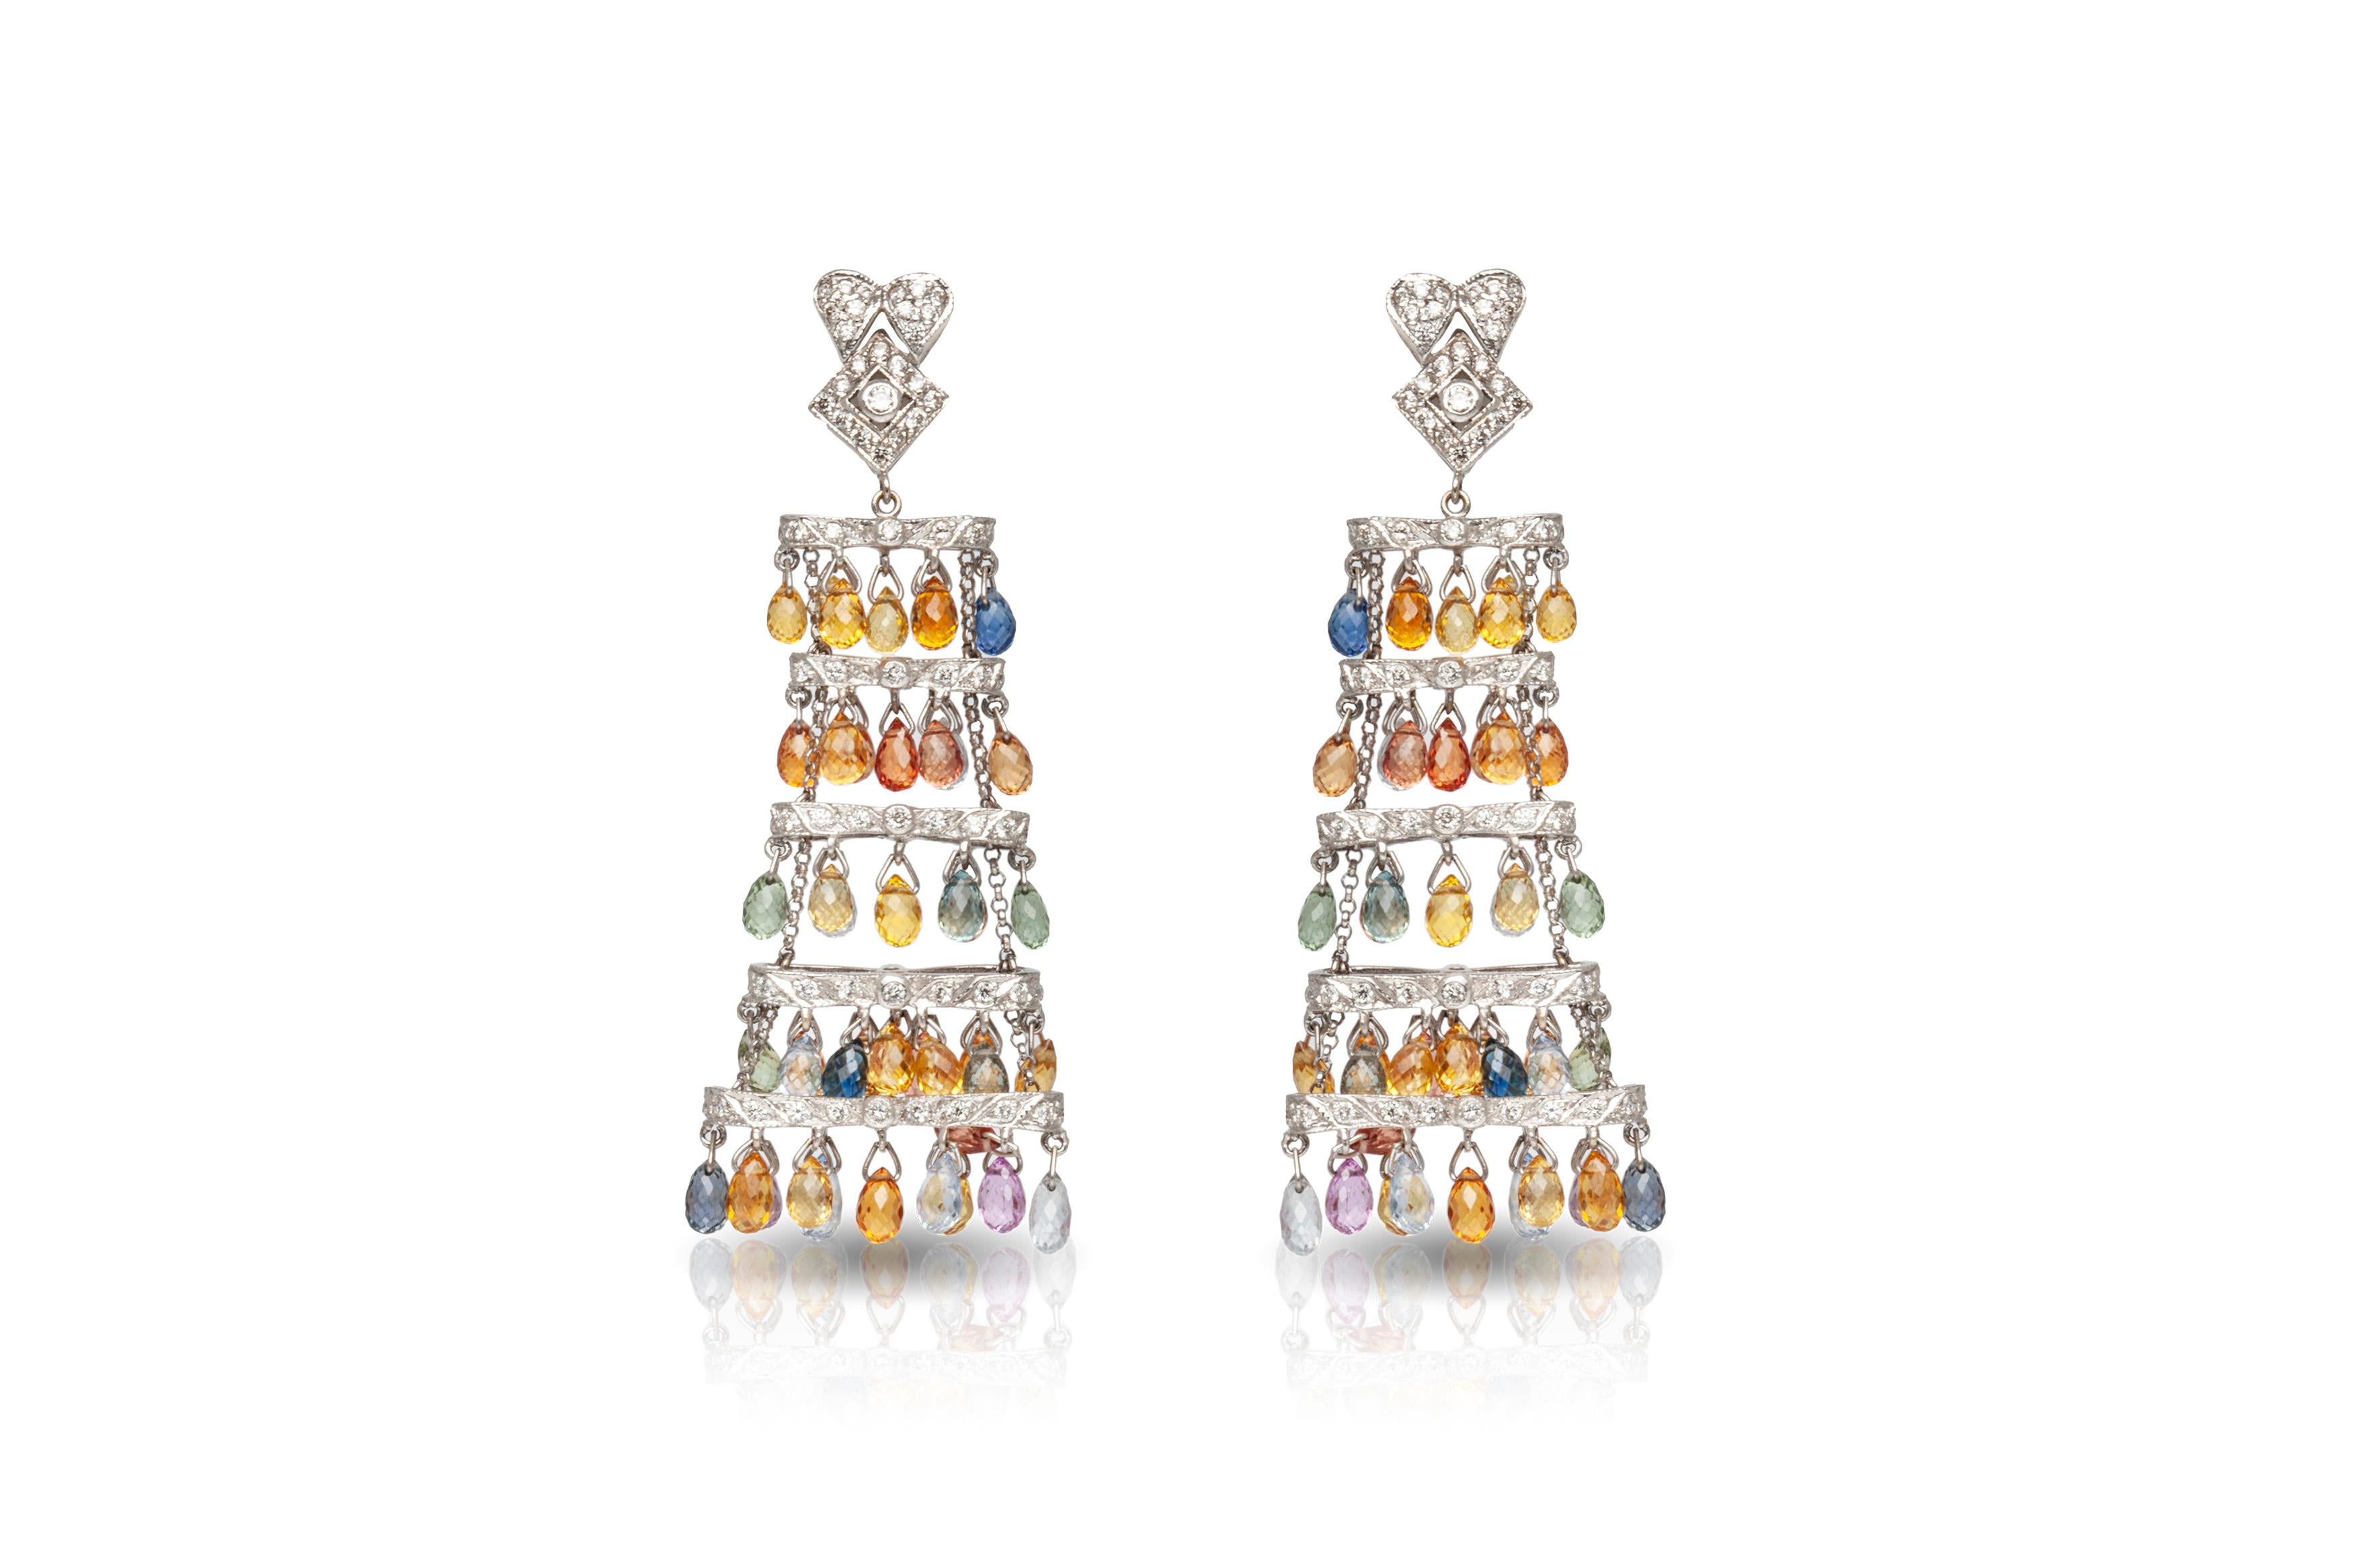 The earrings is finely crafted in 18k white gold with colors of sapphires weighing total of 39.10 carat and diamonds weighing approximately total of 2.50 carat.
